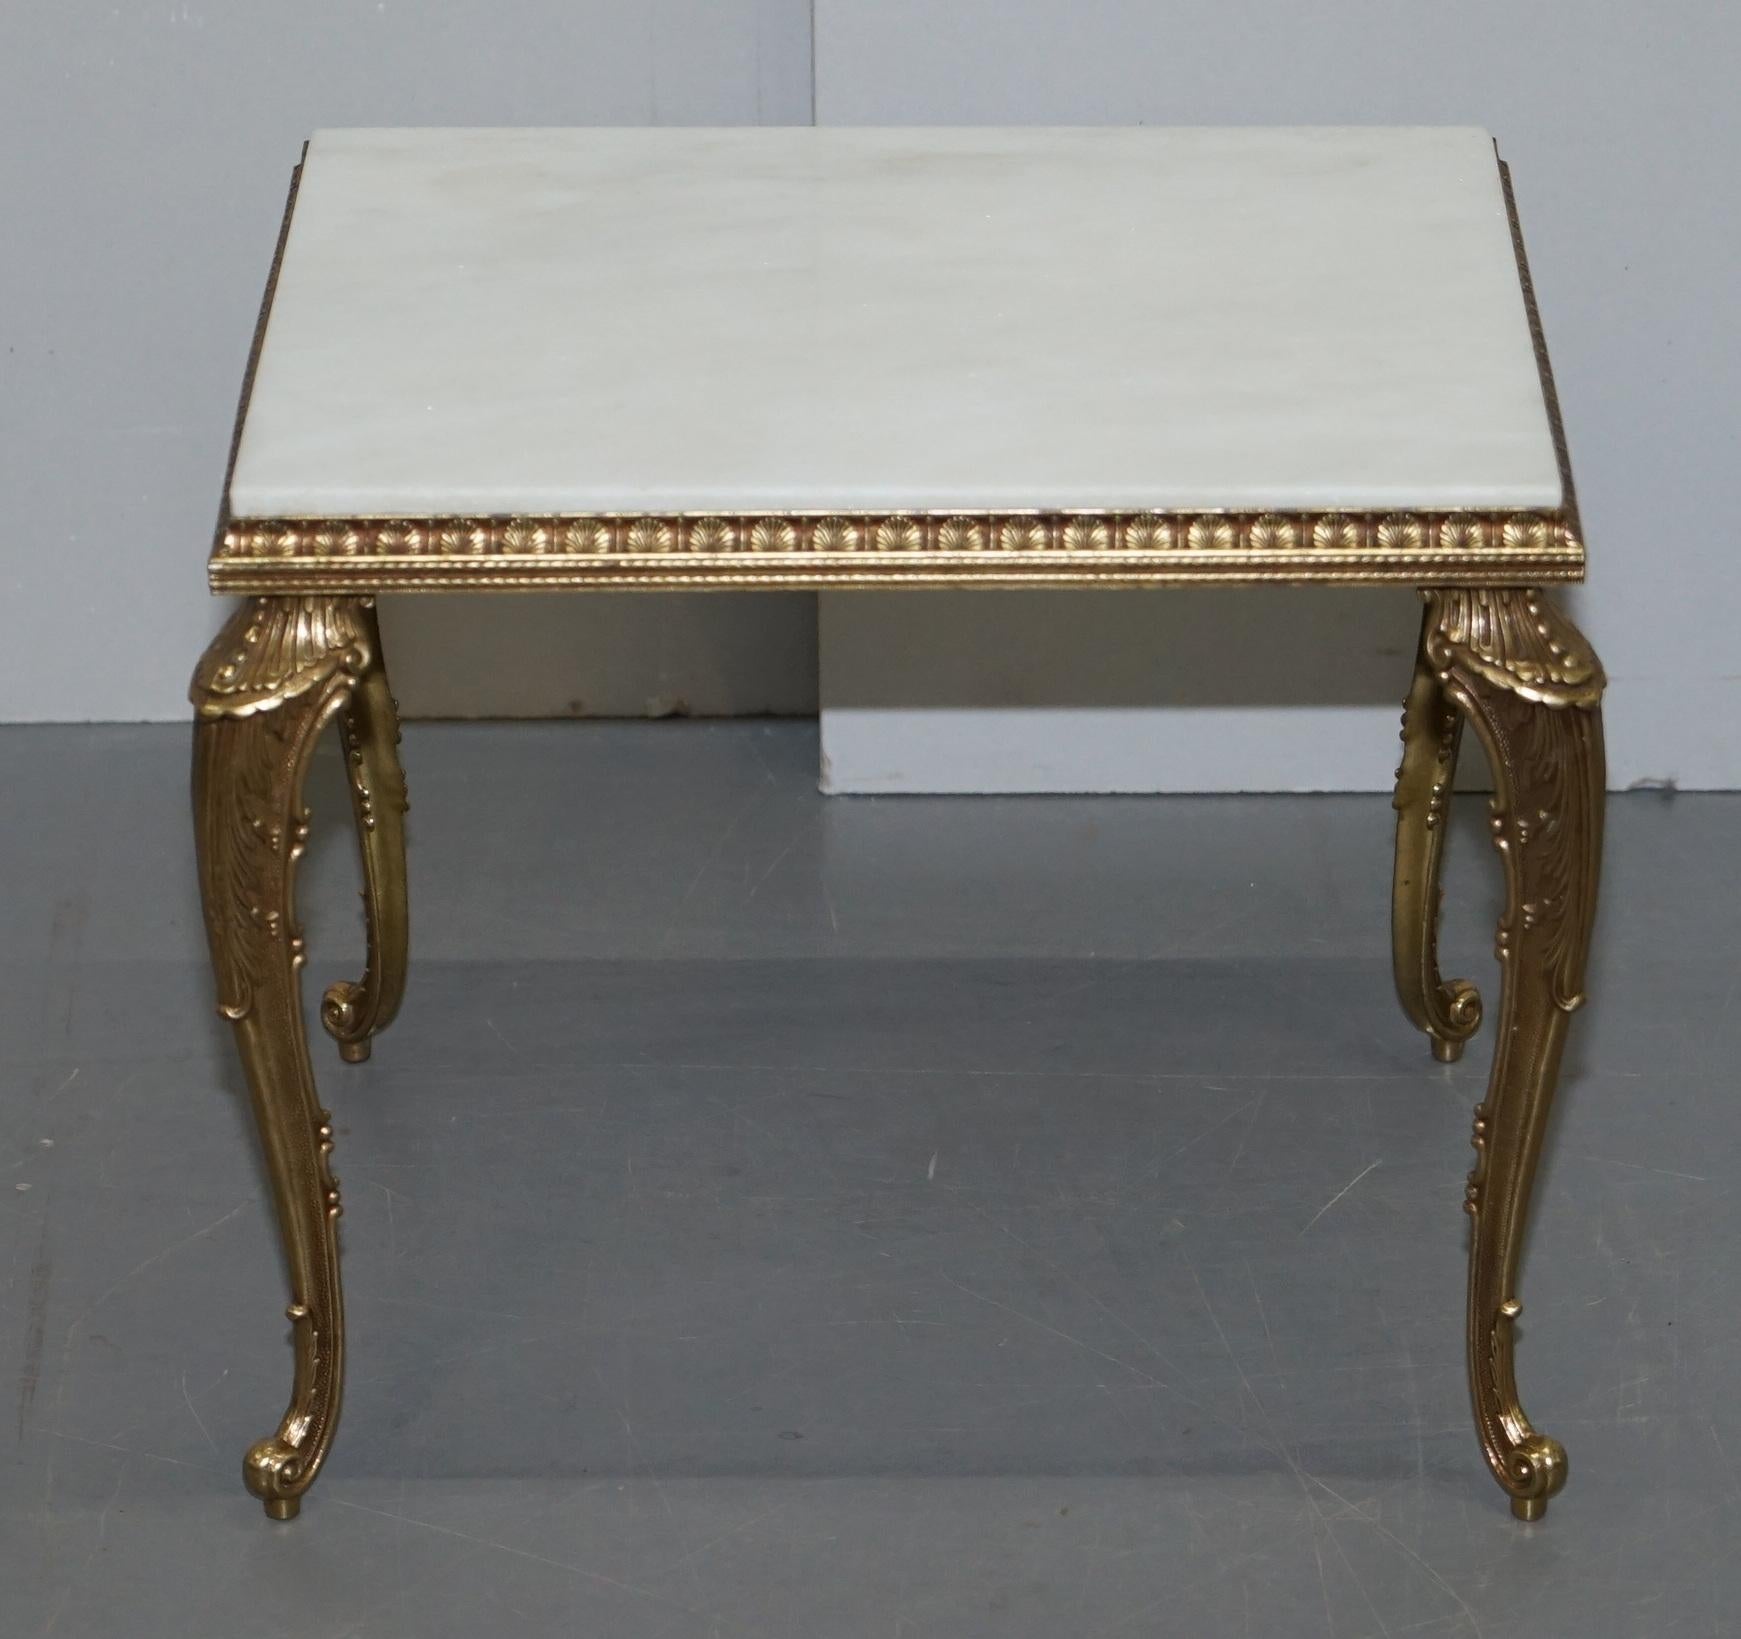 Pair of Lovely circa 1900 French Brass Framed Side Tables Italian Marble Tops For Sale 1